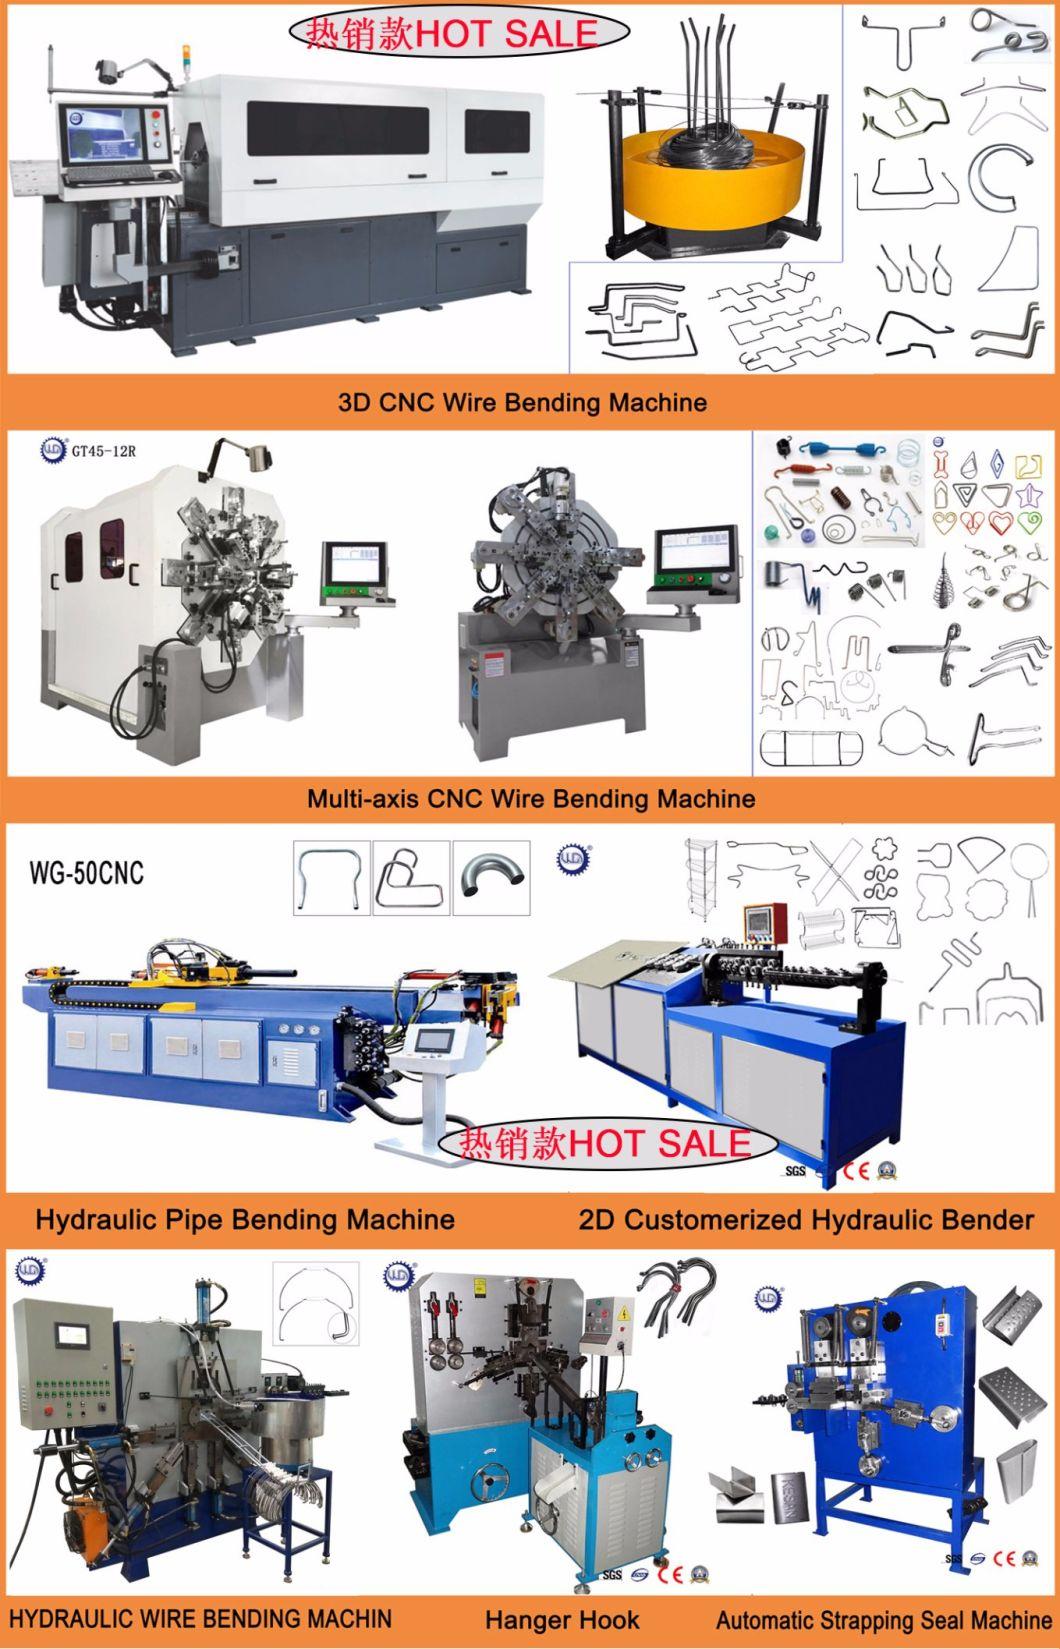 2-Year Wg Standard Export Fumugated Wooden Case CNC Wire Bending Machine with RoHS